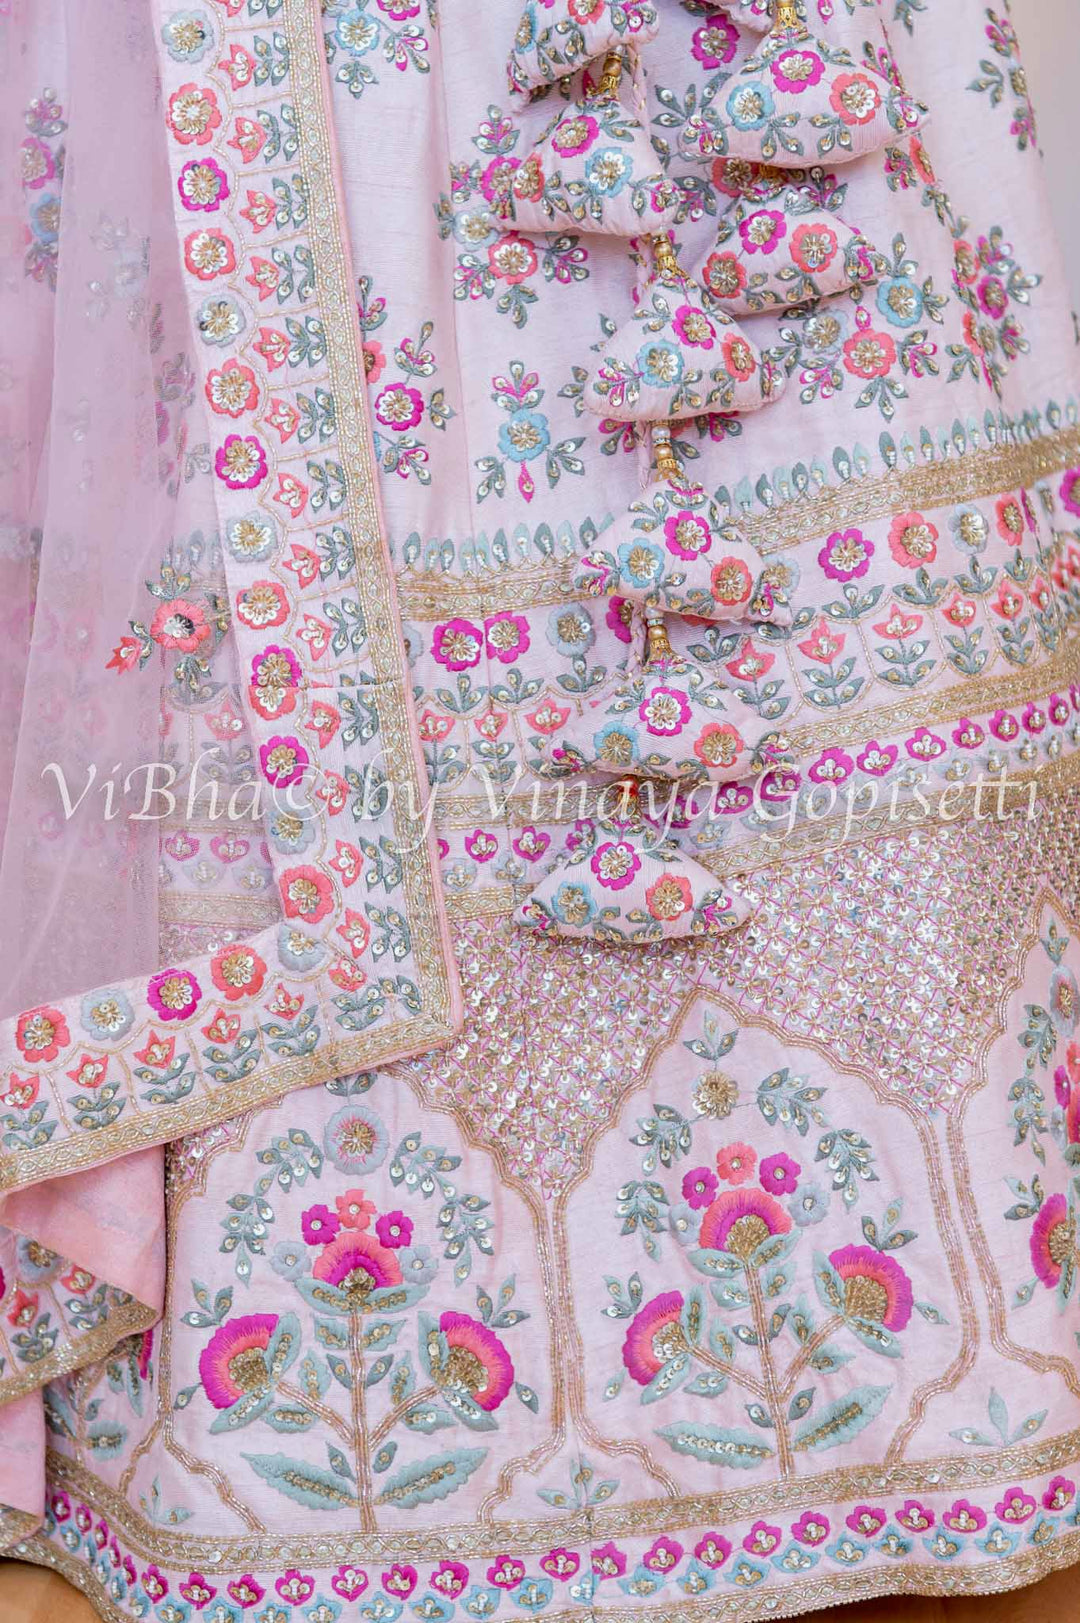 Accessories & Jewelry - Light Pink Raw Silk Lehenga And Blouse With Fully Hand Embroidered In Floral Motifs And Borders With Net Dupatta